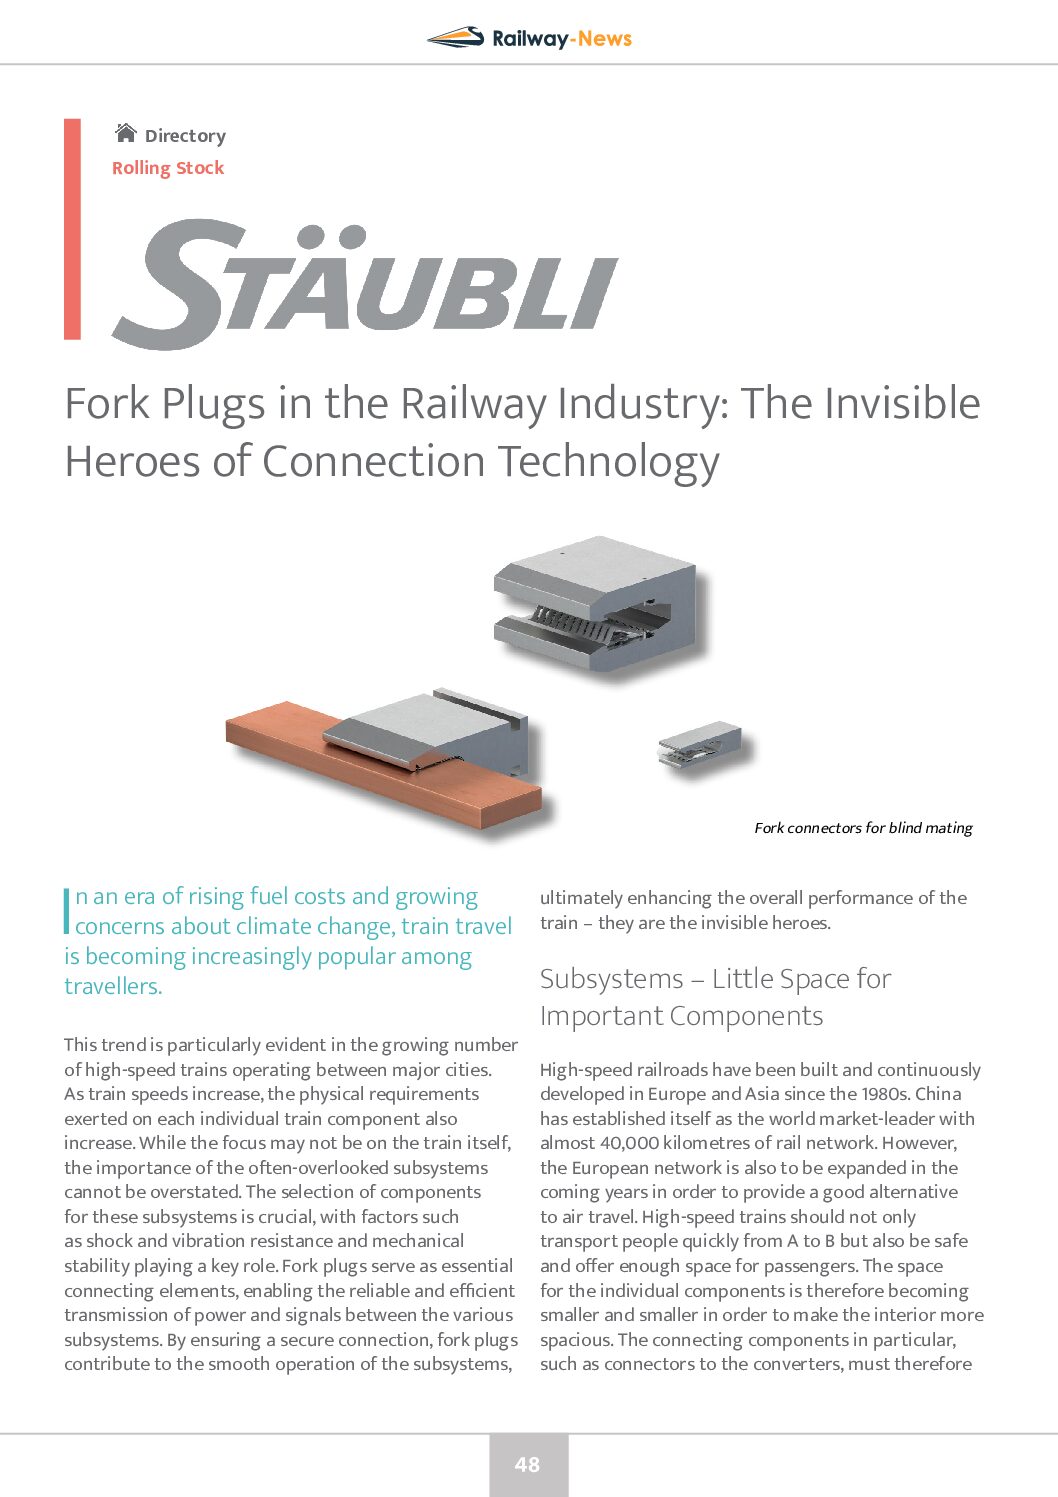 Fork Plugs in the Railway Industry: The Invisible Heroes of Connection Technology